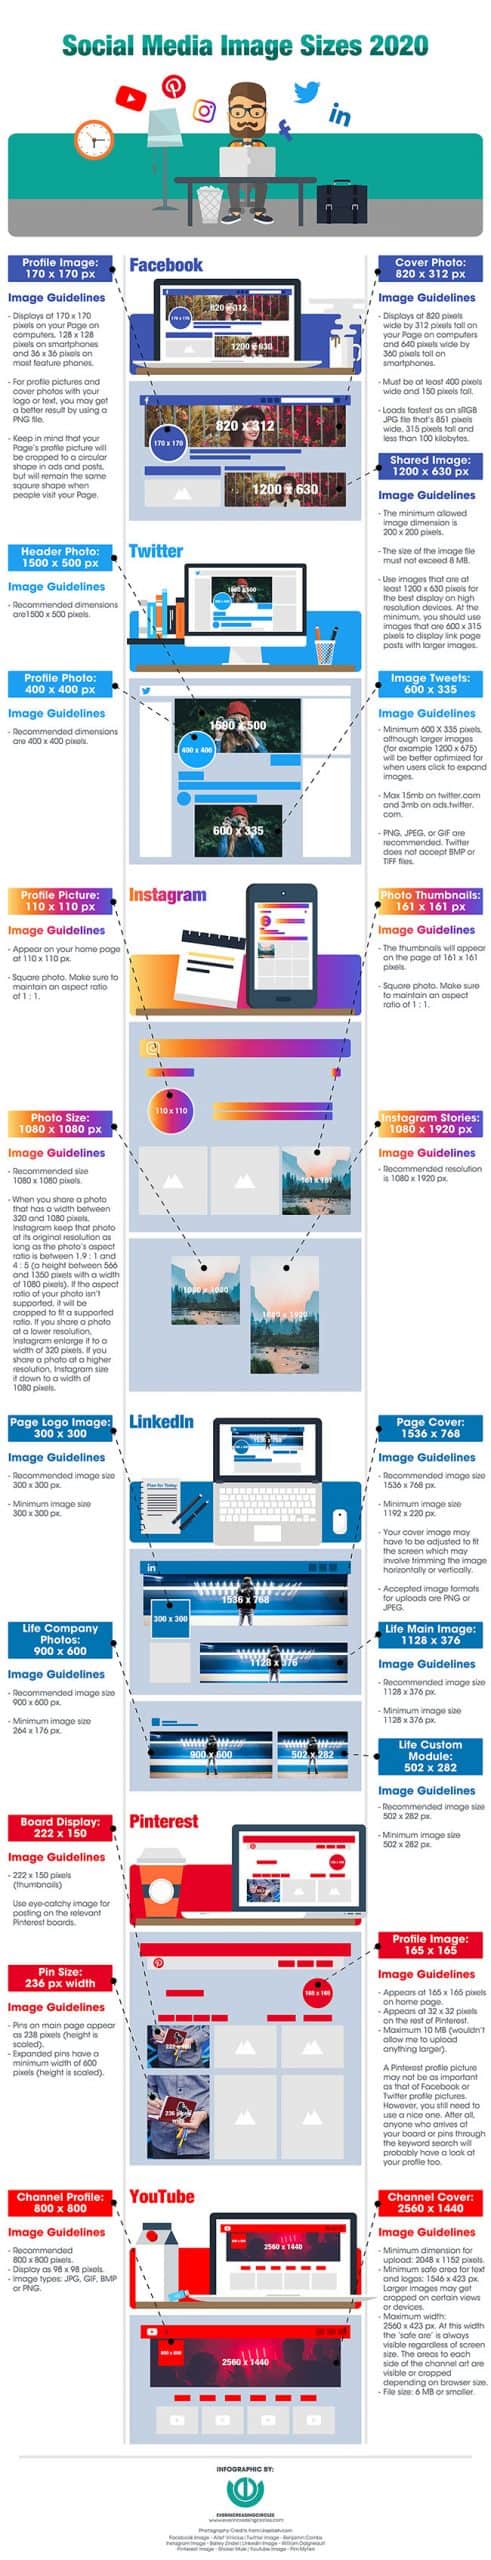 Social Media Images Size and Dimensions Infographic by Hubspot